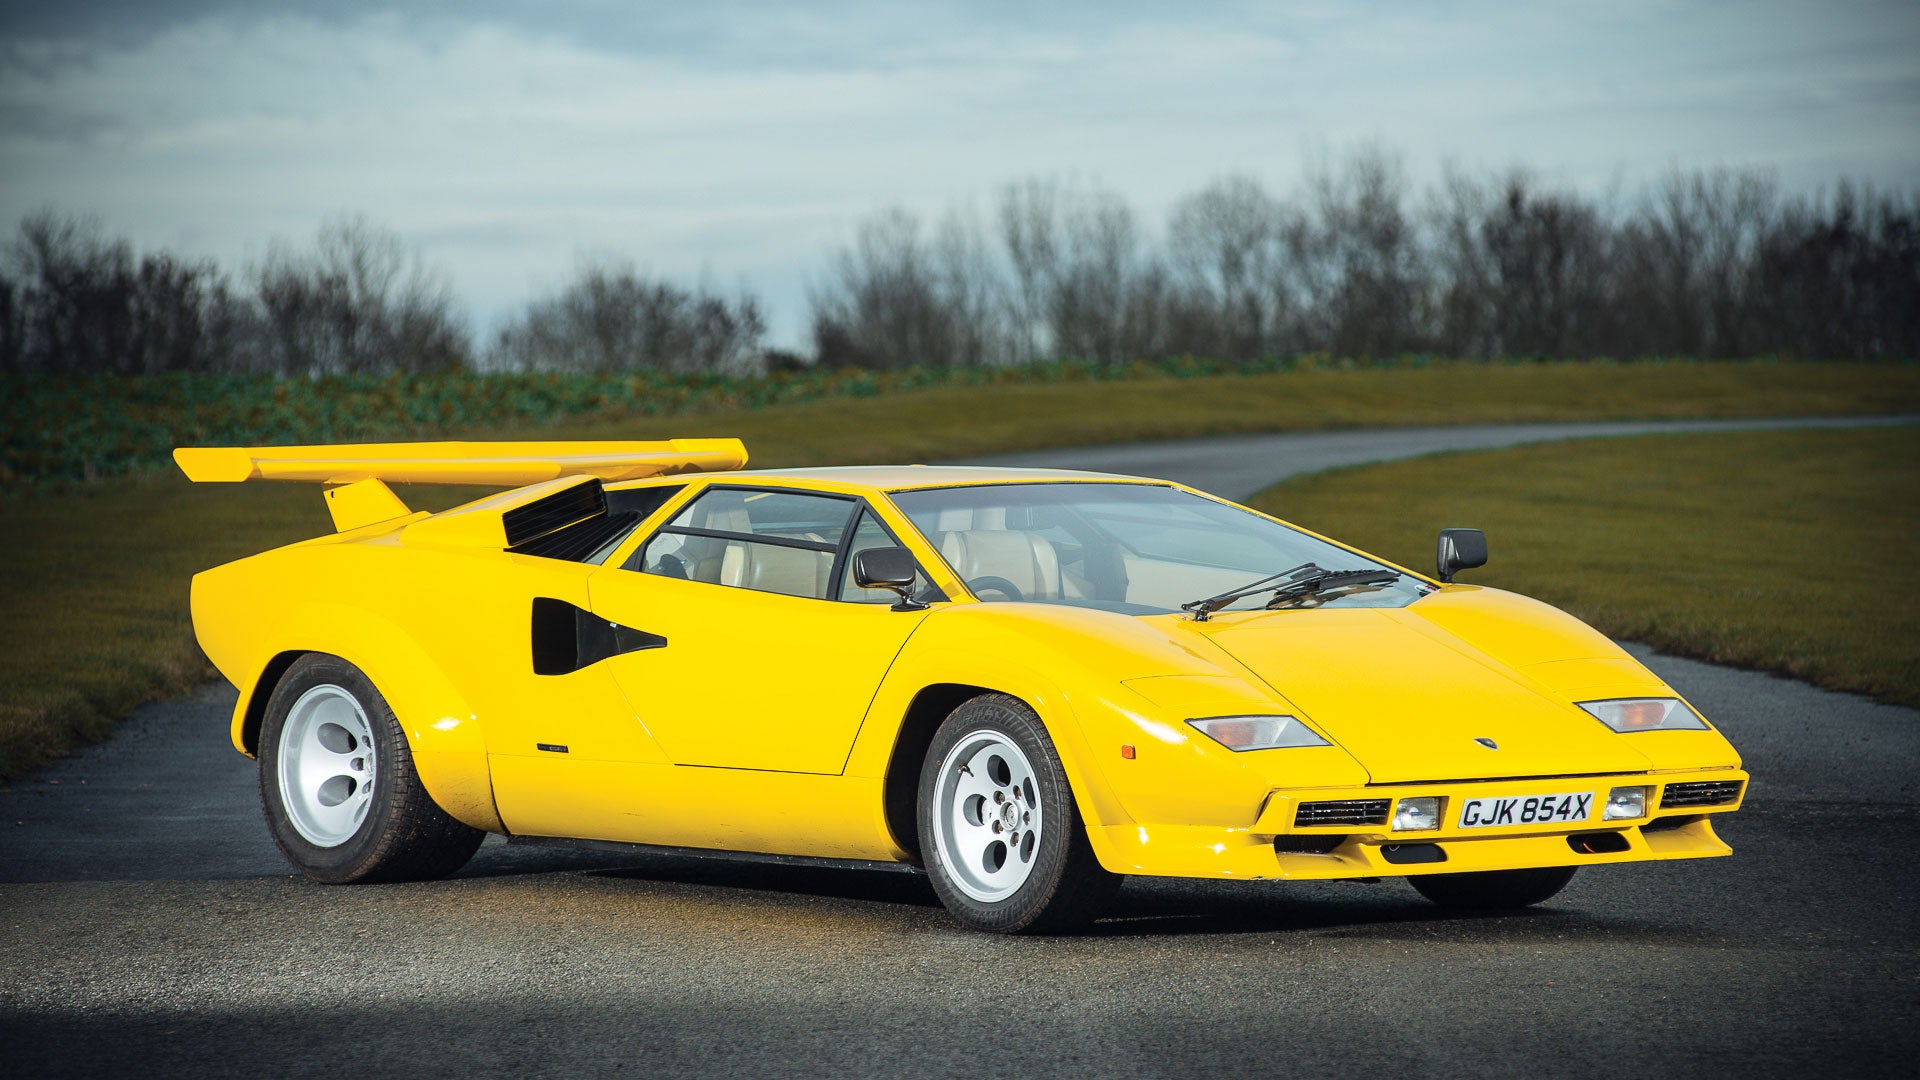 5 Things You Didn’t Know About the Lamborghini Countach